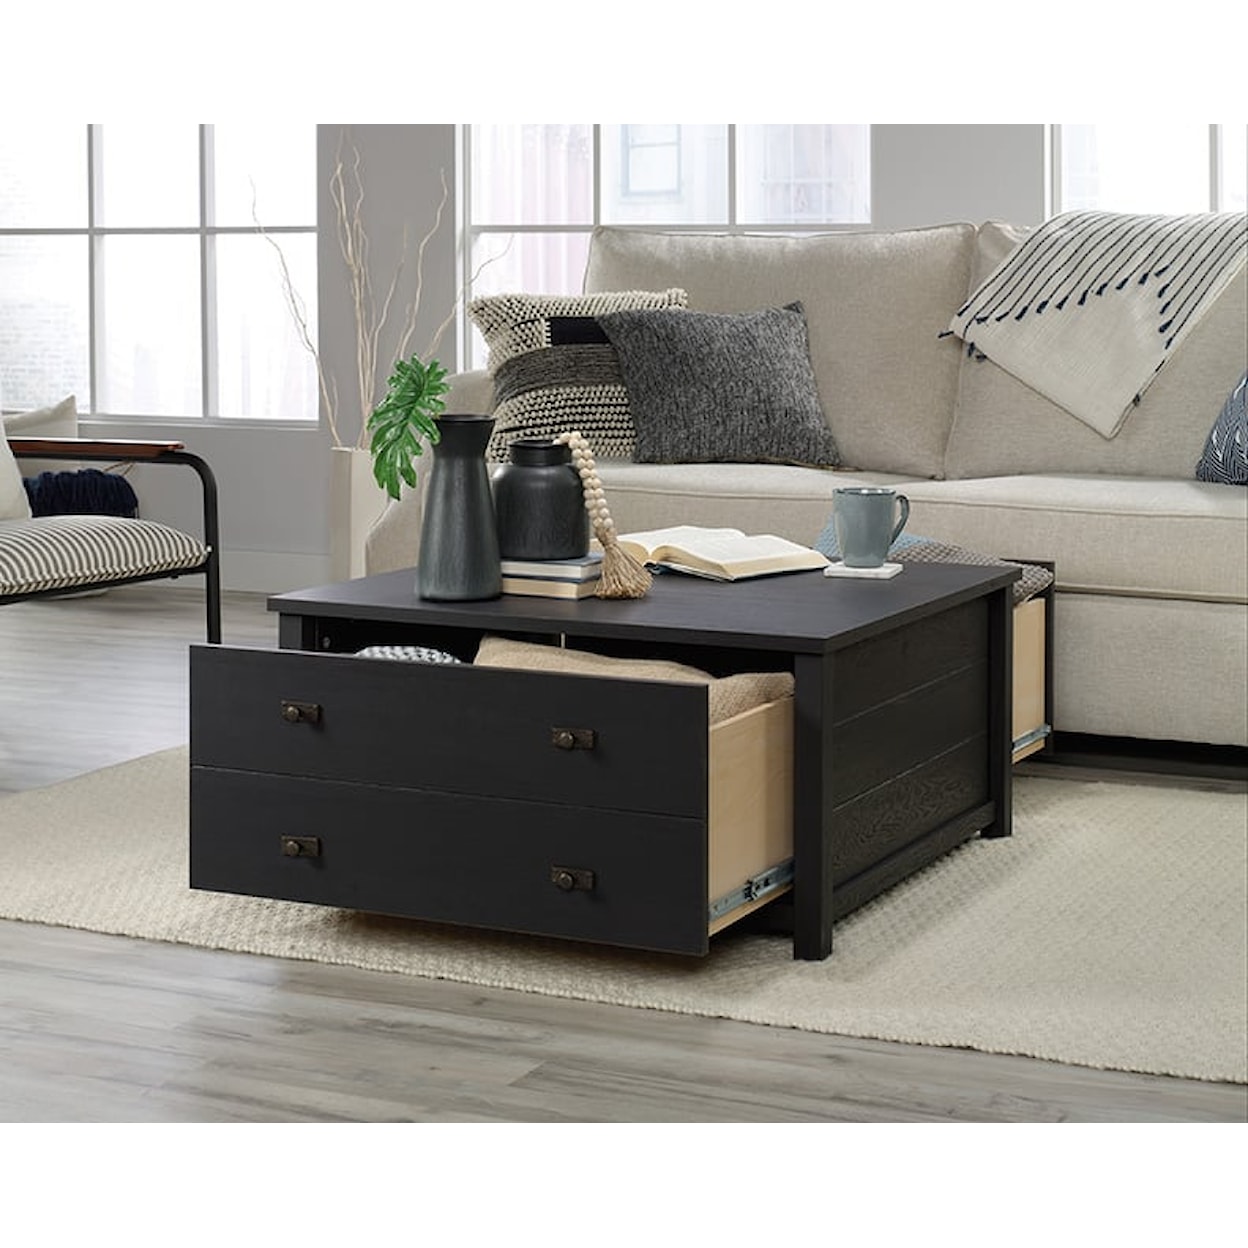 Sauder Cottage Road Square Coffee Table